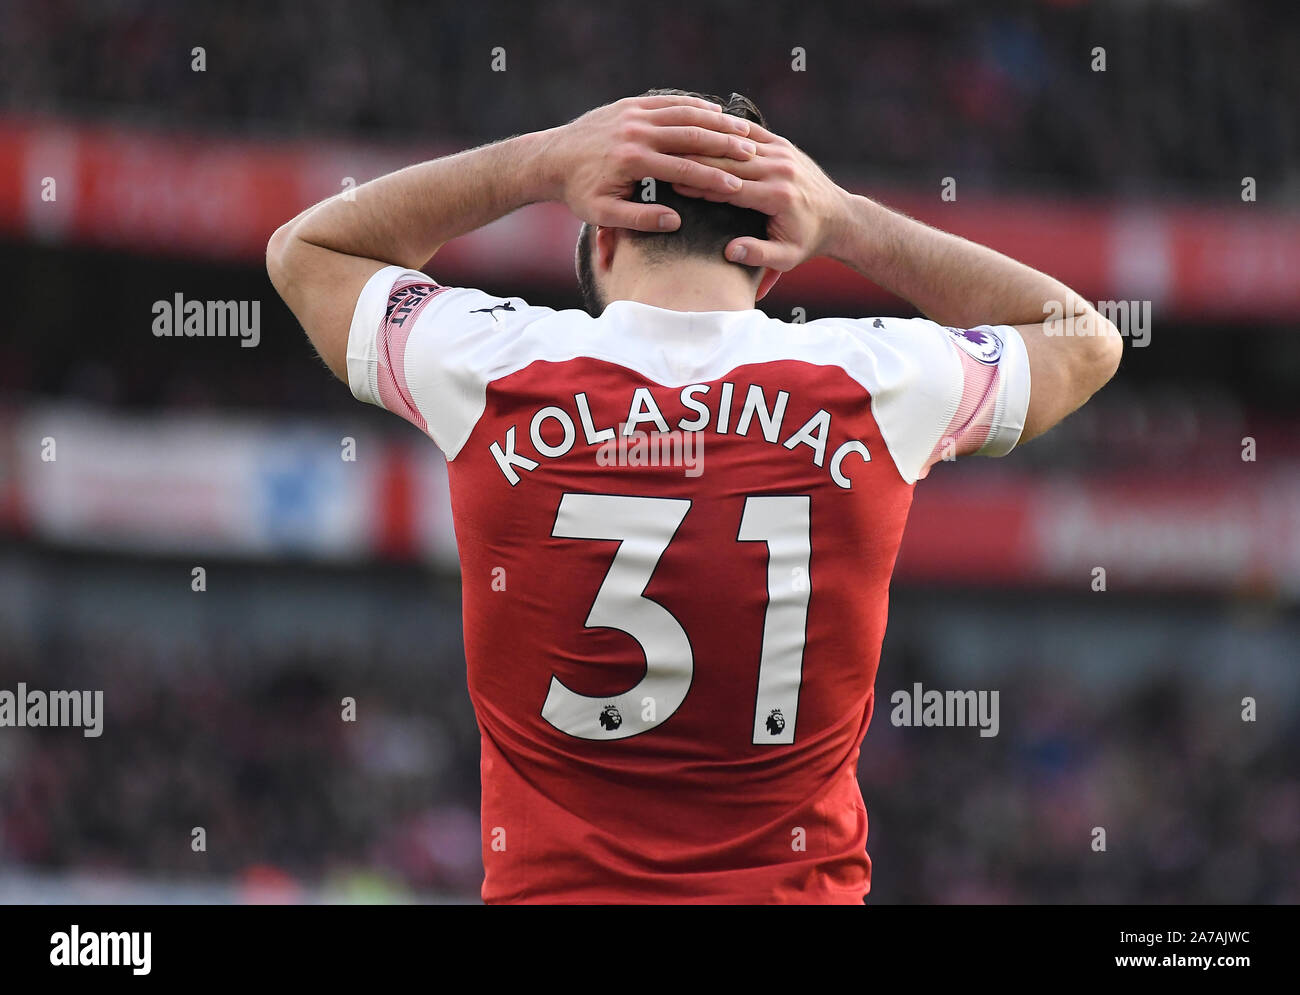 LONDON, ENGLAND - DECEMBER 22, 2018: Sead Kolasinac of Arsenal pictured during the 2018/19 Premier League game between Arsenal FC and Burnley FC at Emirates Stadium. Stock Photo